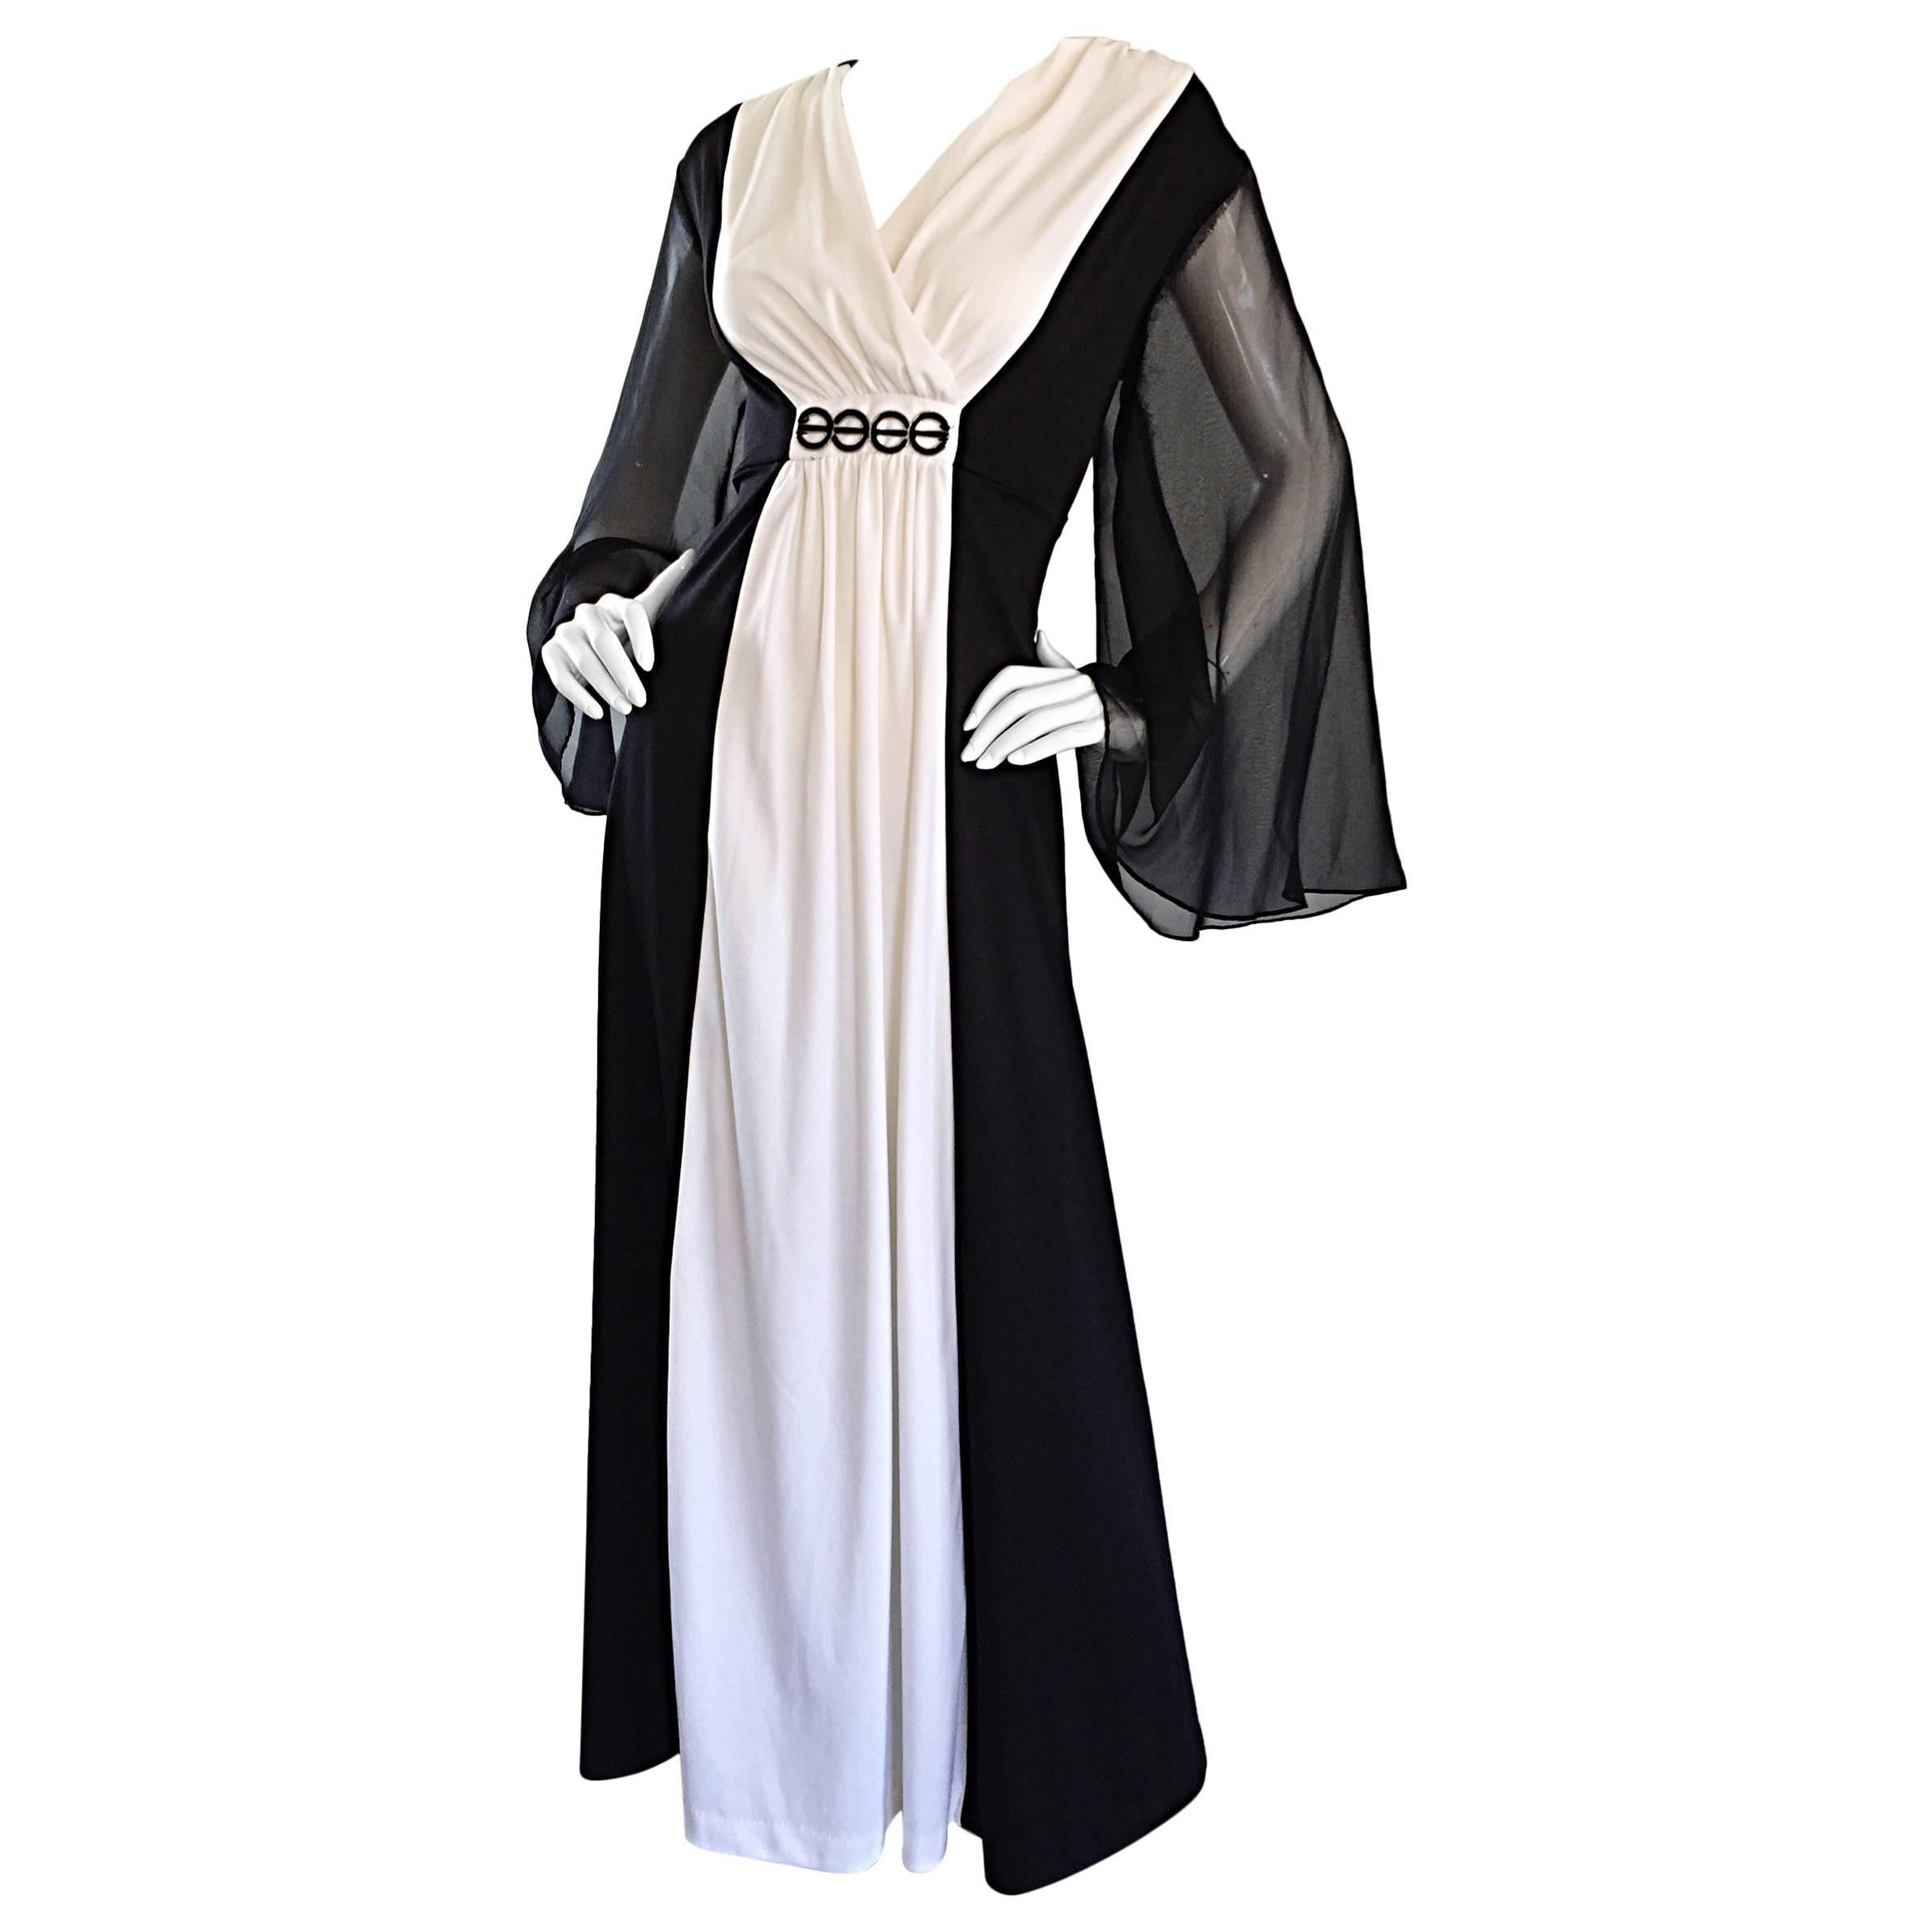 Amazing 1970s 70s Black and White Grecian Maxi Dress / Gown w/ Angel Sleeves For Sale